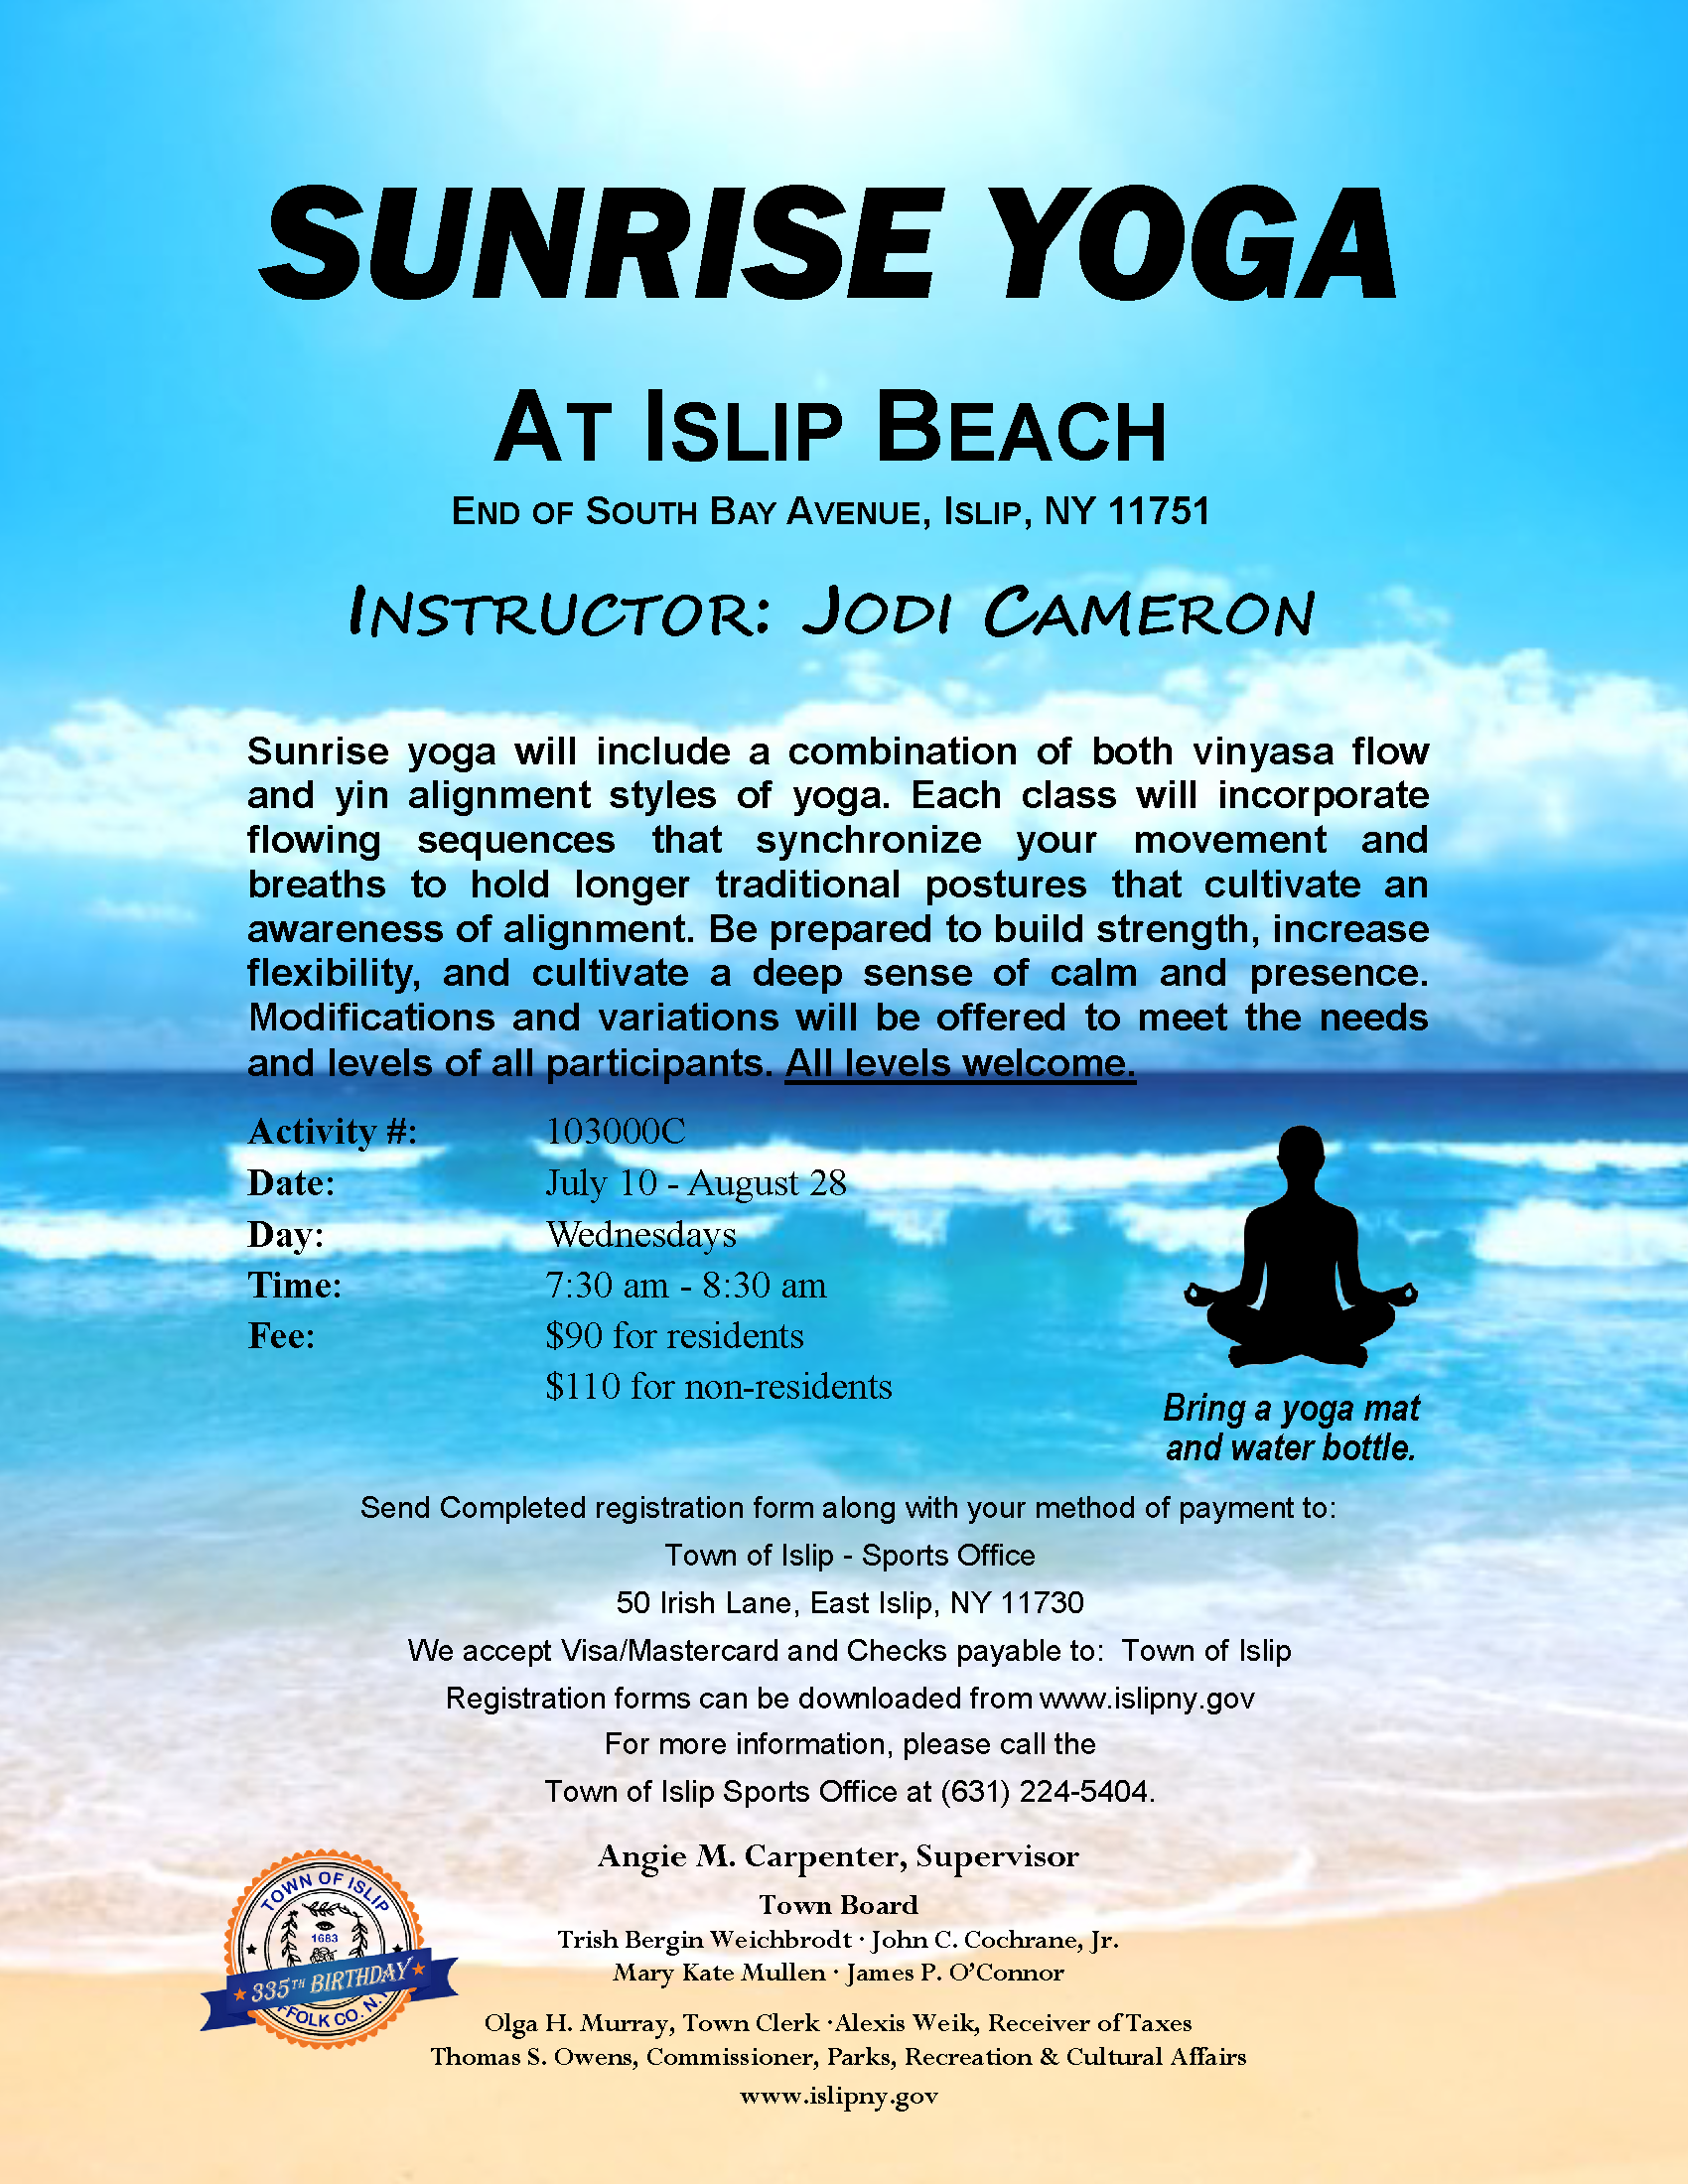 Sunrise Yoga Classes flyer, call (631) 224-5404 for more information.